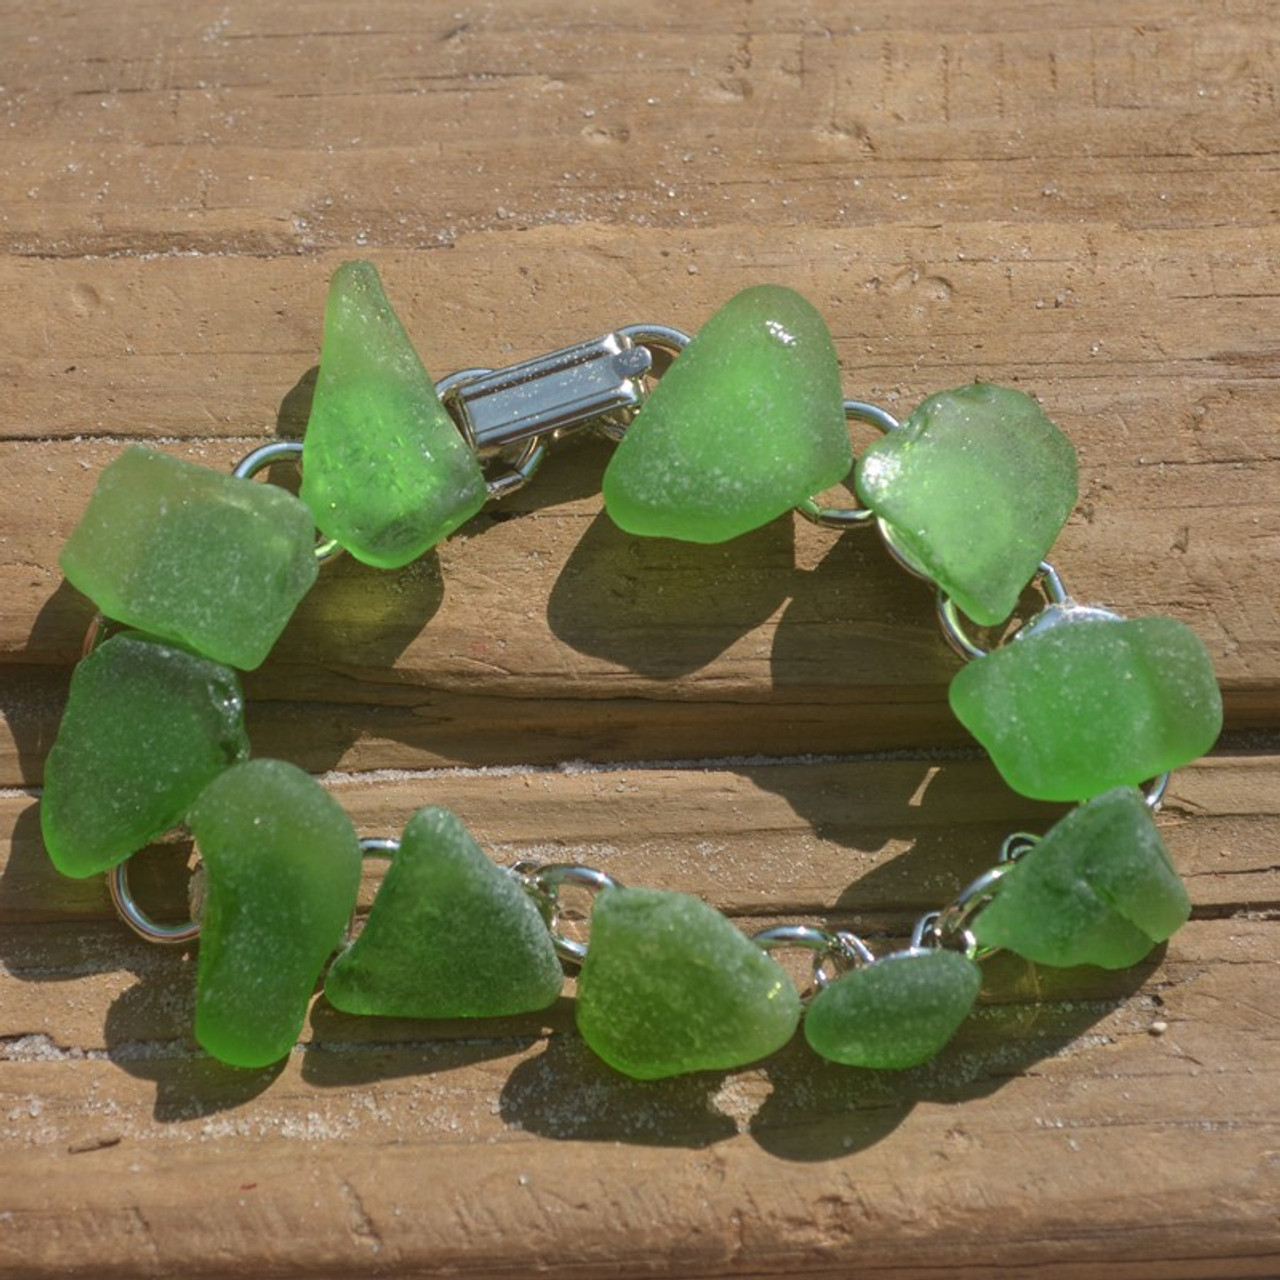 Genuine Kelly Green Sea Glass Bracelet - 3 Size Options - Made to Order